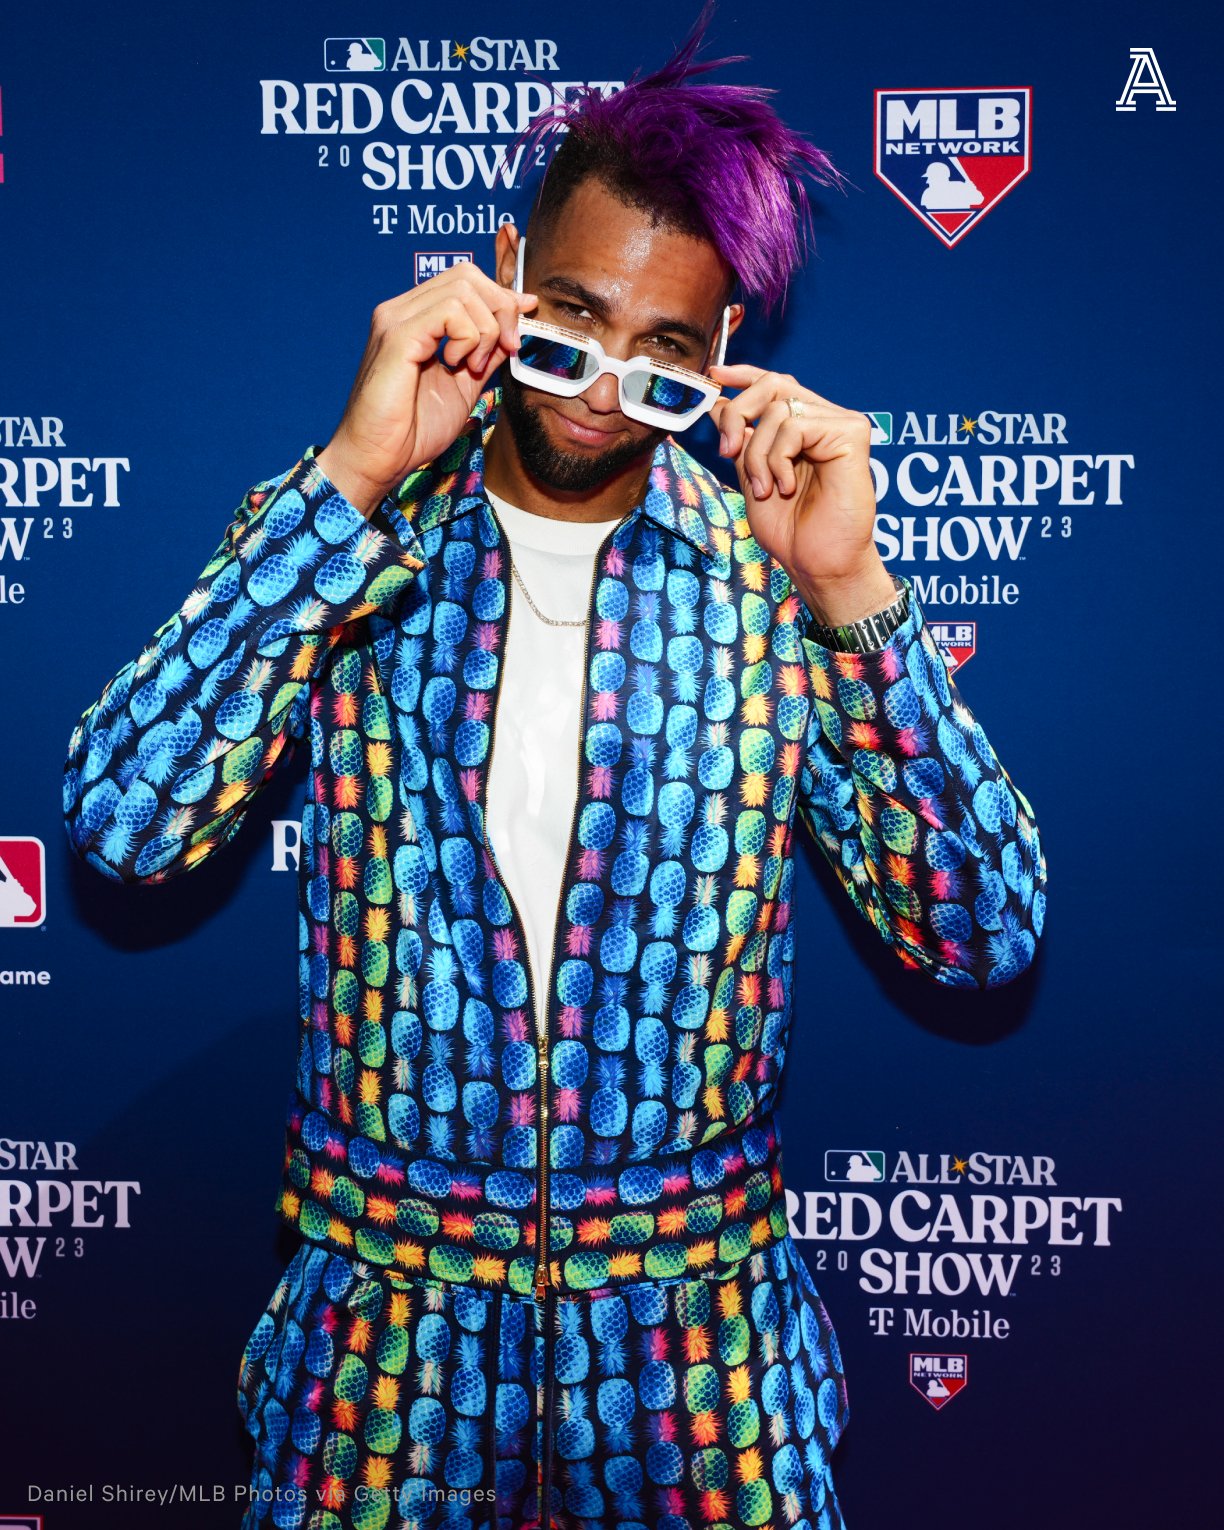 In Photos: MLB stars including Shohei Ohtani, Freddie Freeman, and family  show up in their most fashionable fits for MLB All-Star Red Carpet Show